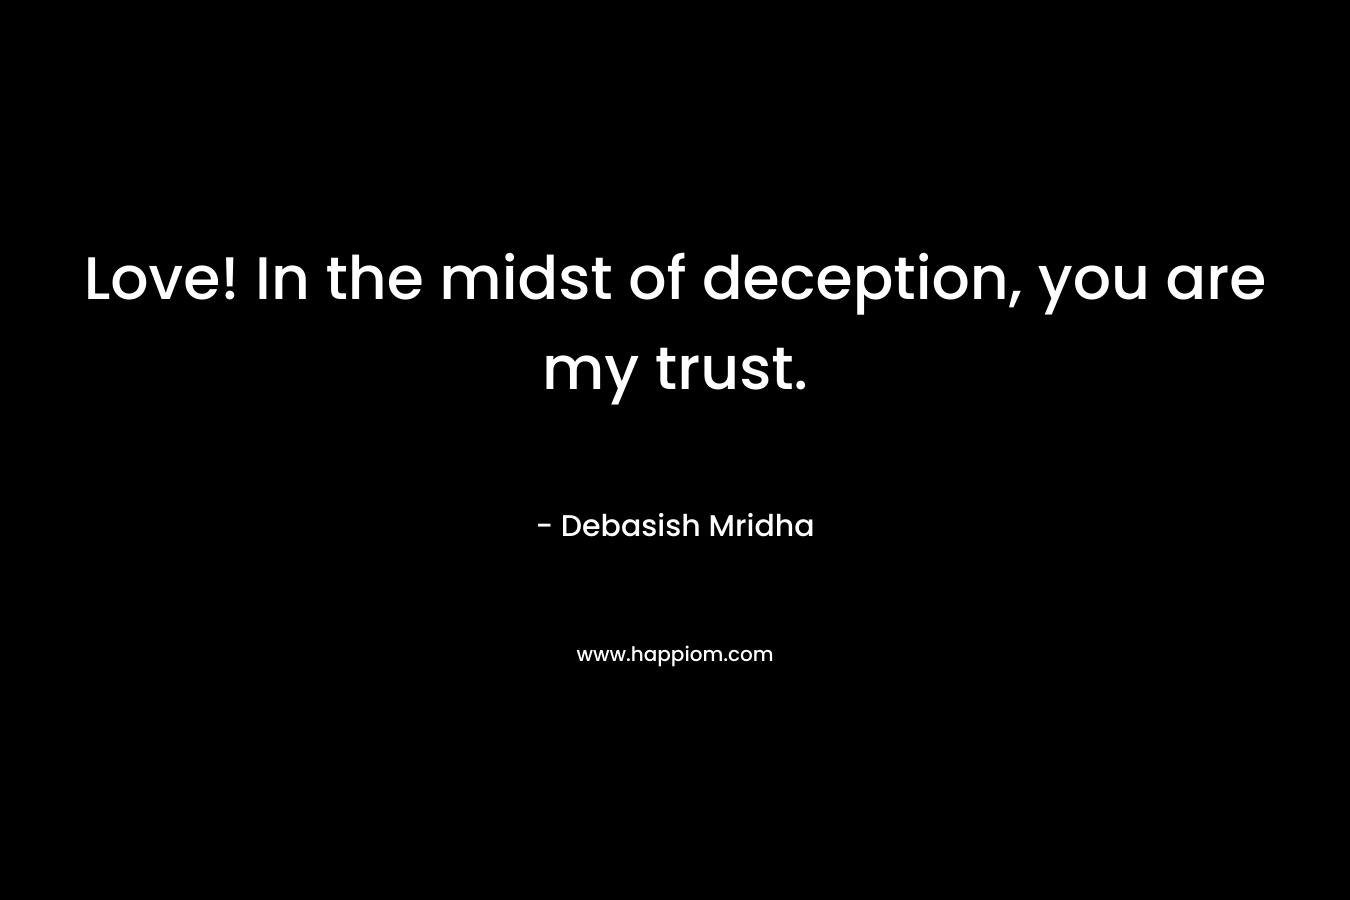 Love! In the midst of deception, you are my trust.